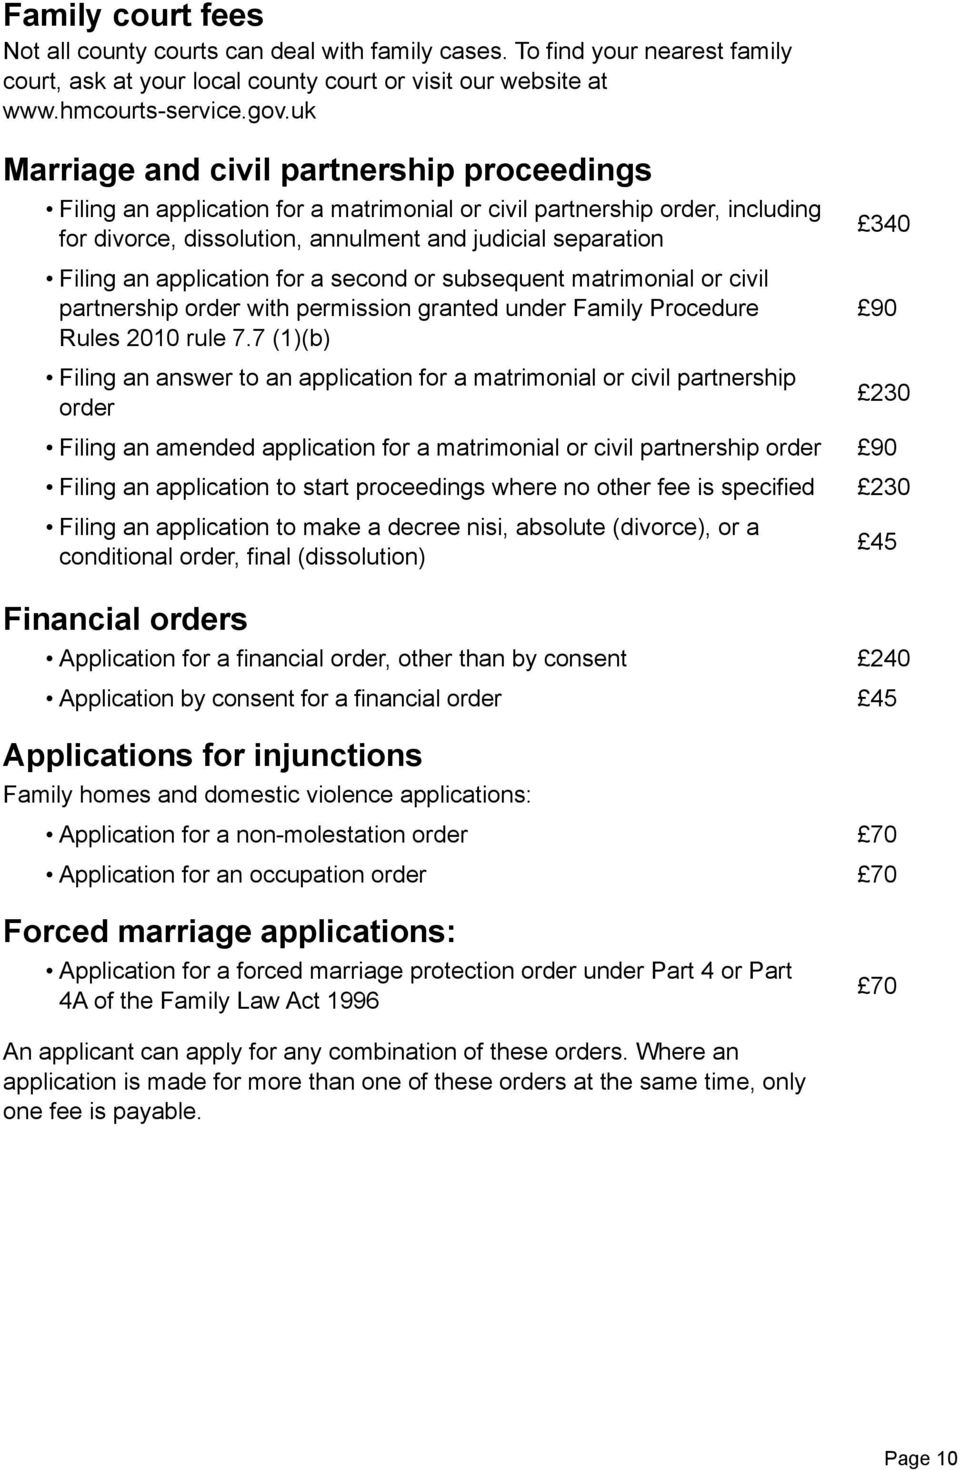 application for a second or subsequent matrimonial or civil partnership order with permission granted under Family Procedure Rules 2010 rule 7.